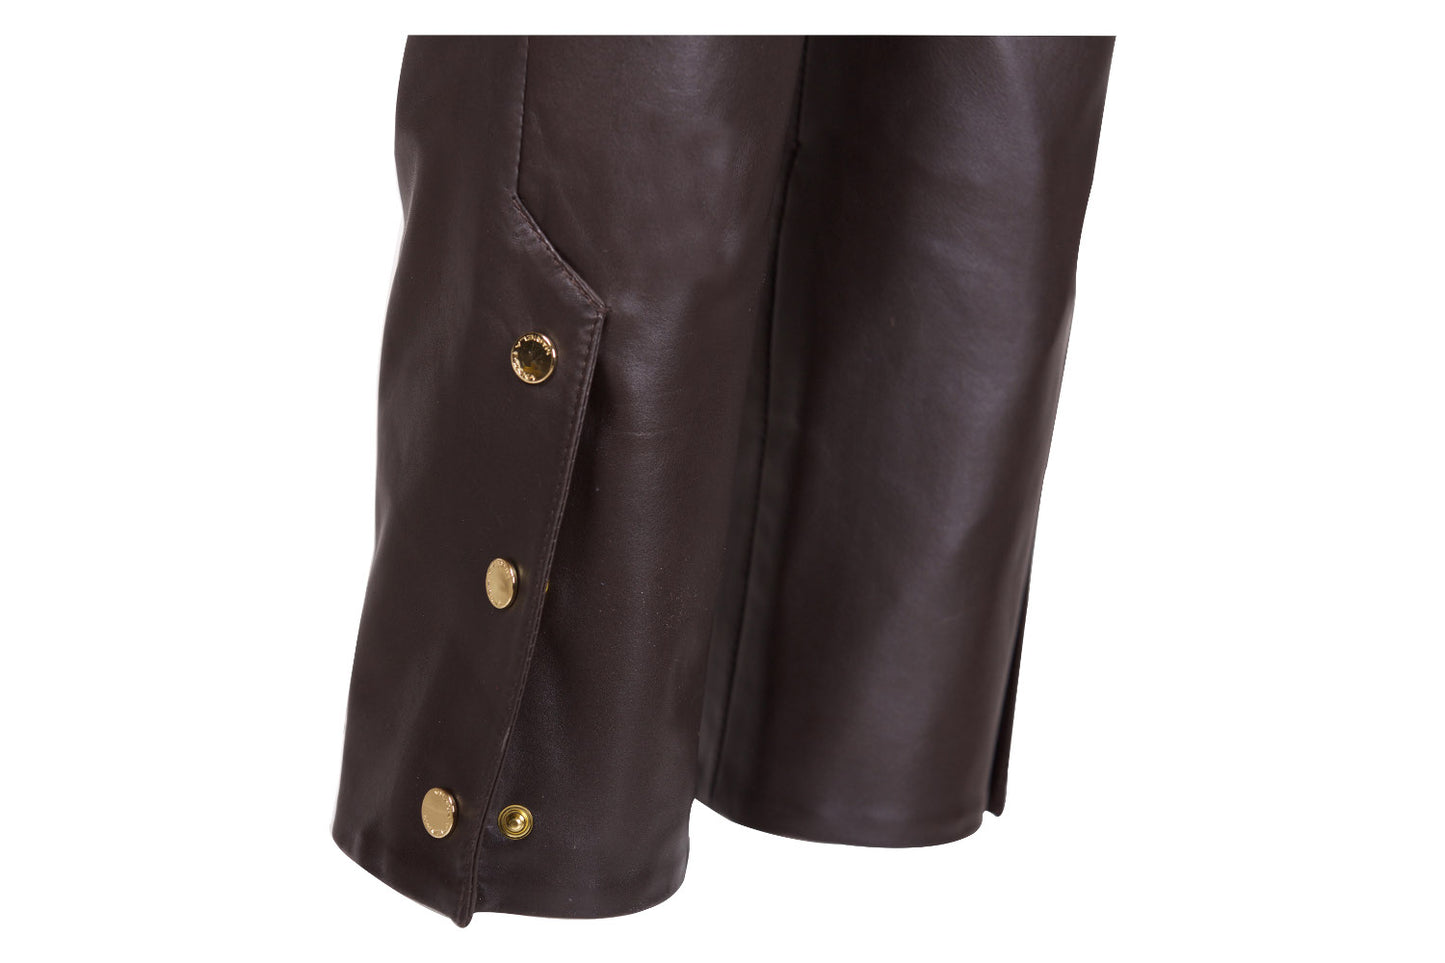 Tailored Black-Brown Suede Reindeer Leather Pants- Limited Edition